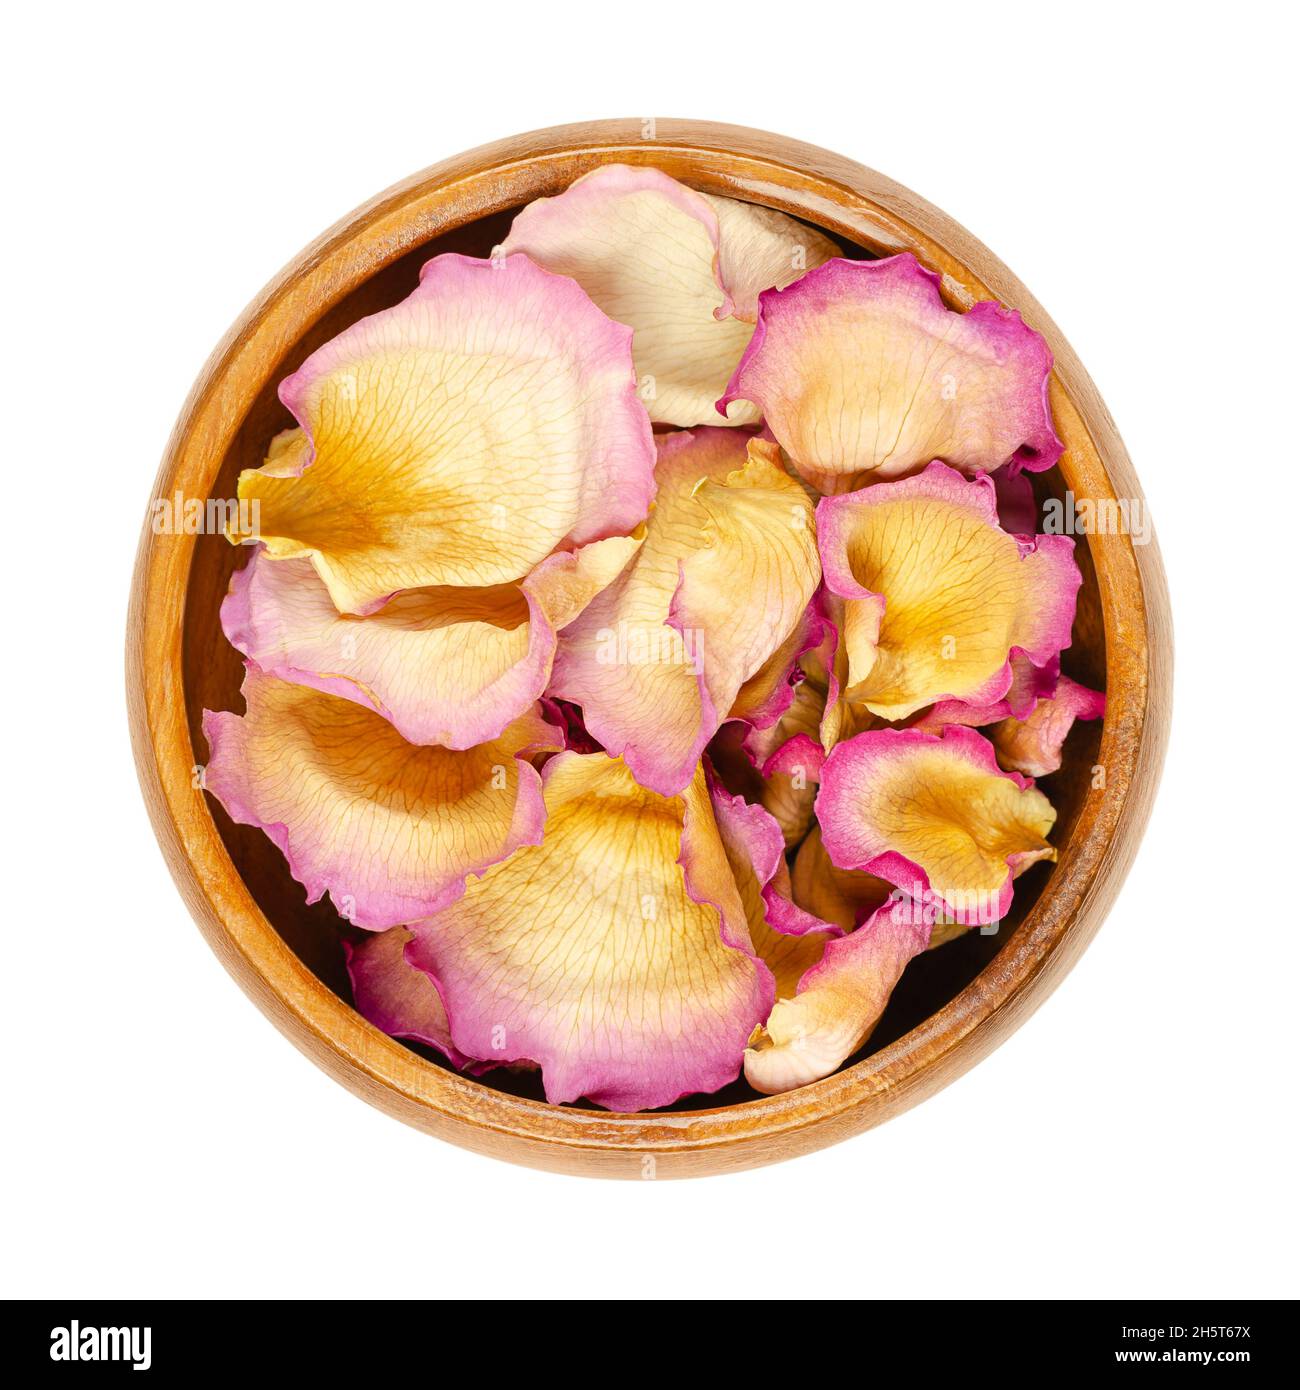 Dried whole rose petals in a wooden bowl. Petals of a light pink colored garden rose, called China, Chinese or Bengal rose. Rosa chinensis. Stock Photo